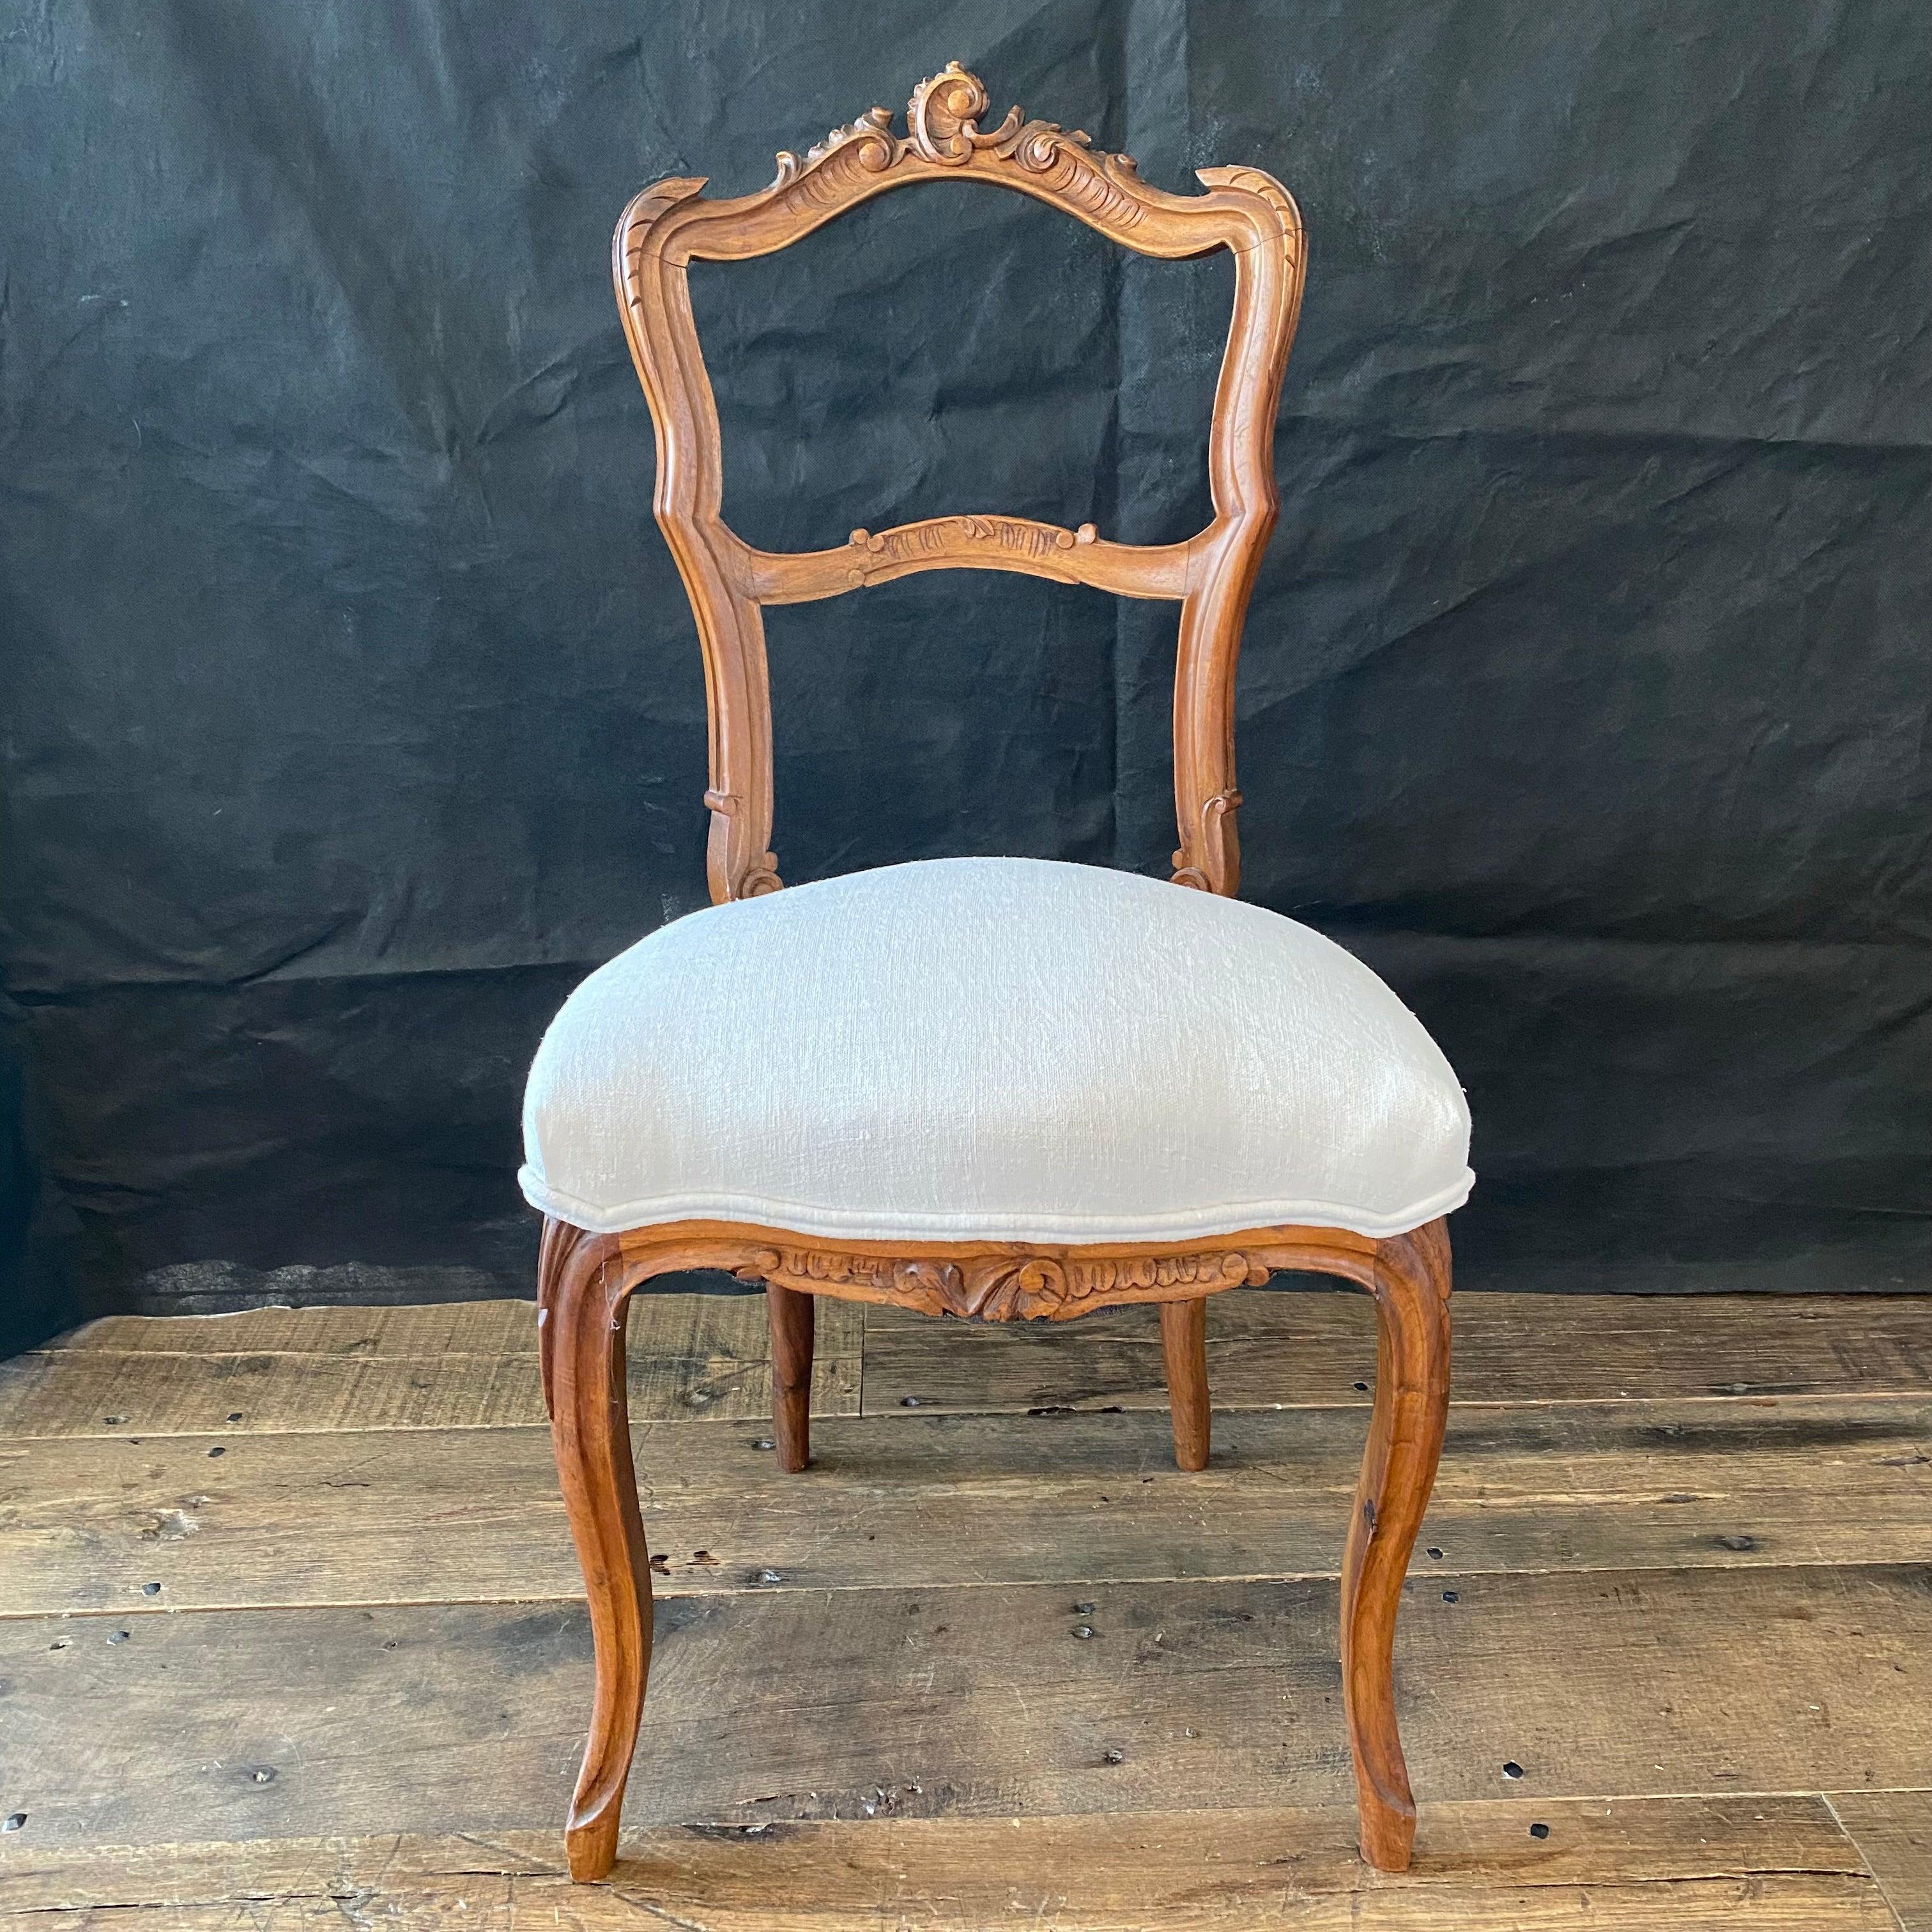 Really high quality pair of Louis XV side chairs bought outside Paris having beautiful hand carved walnut backs, aprons and cabriolet legs. All new neutral upholstery highlights the lovely detail of the chairs.

#4619.